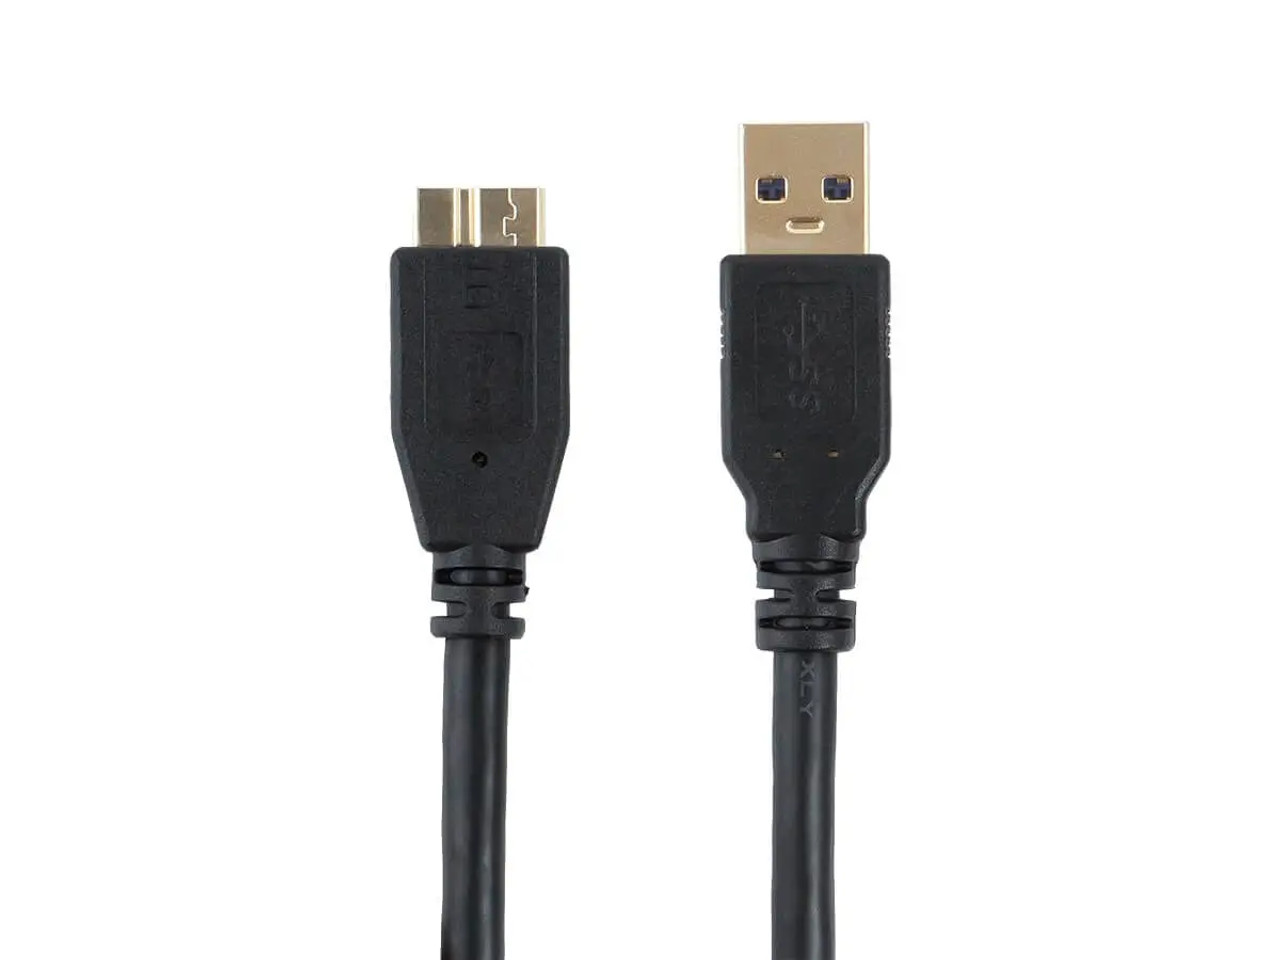 SELECT USB 3.0 TYPE-A TO MICRO TYPE-B  = 1.5 FT (BLACK)